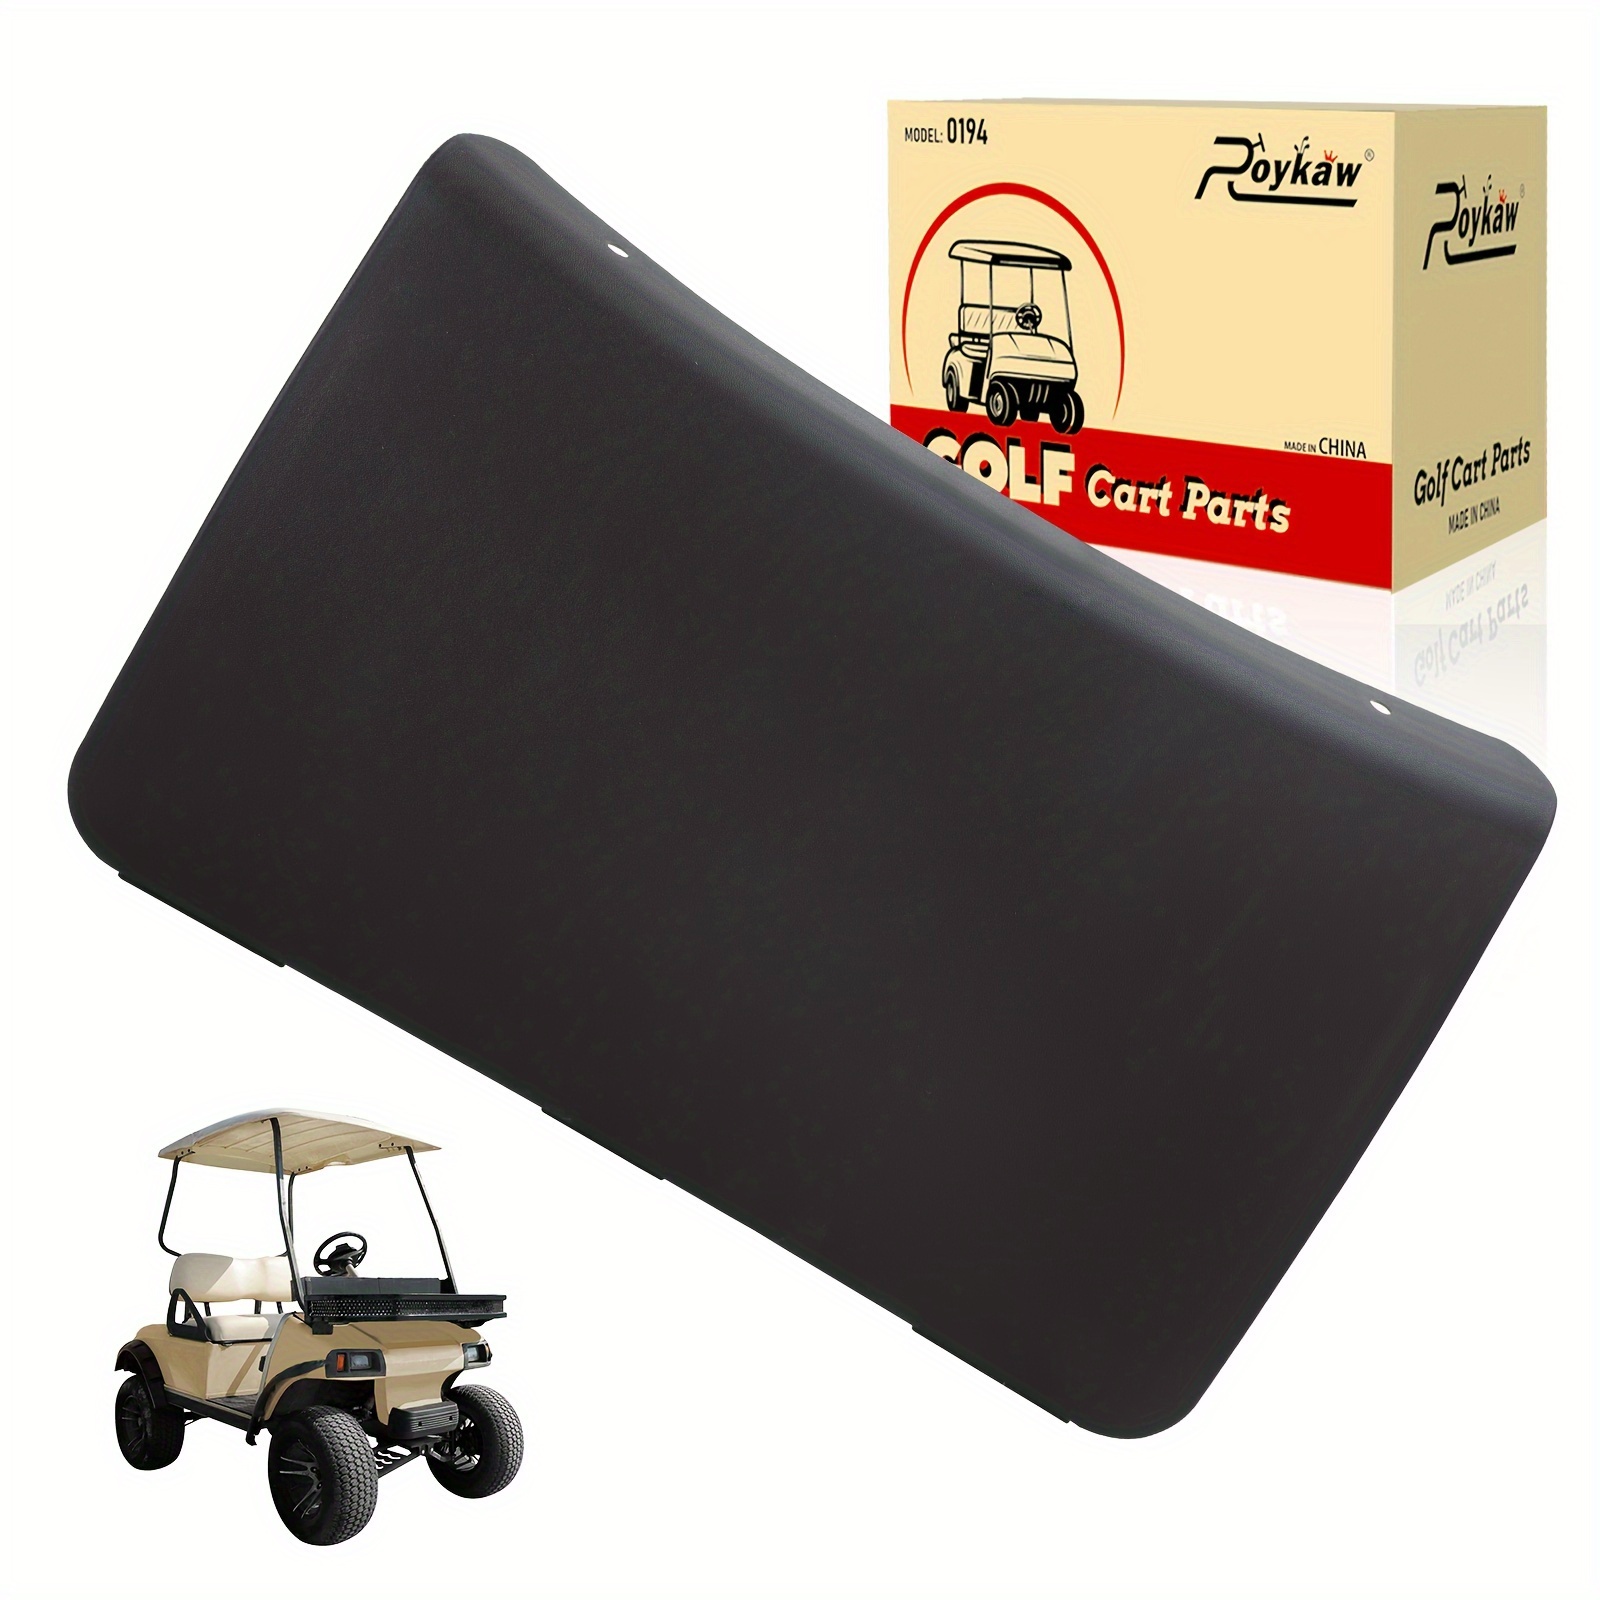 

Golf Cart Access Panel/cover Replacement For Ds, Gas And Electric Models, Easy To Install